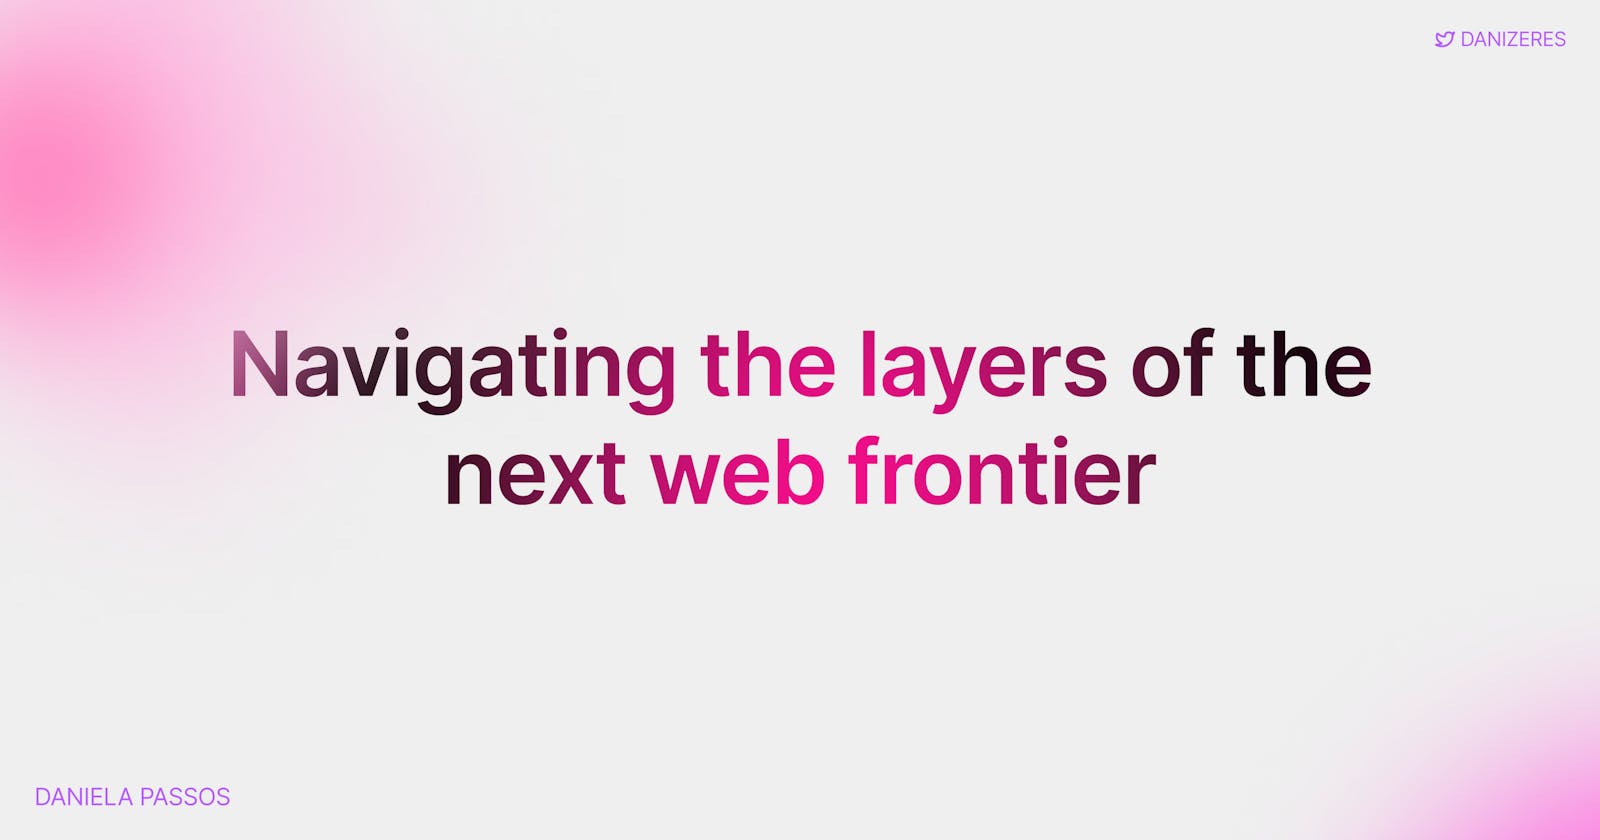 Navigating the layers of the next web frontier